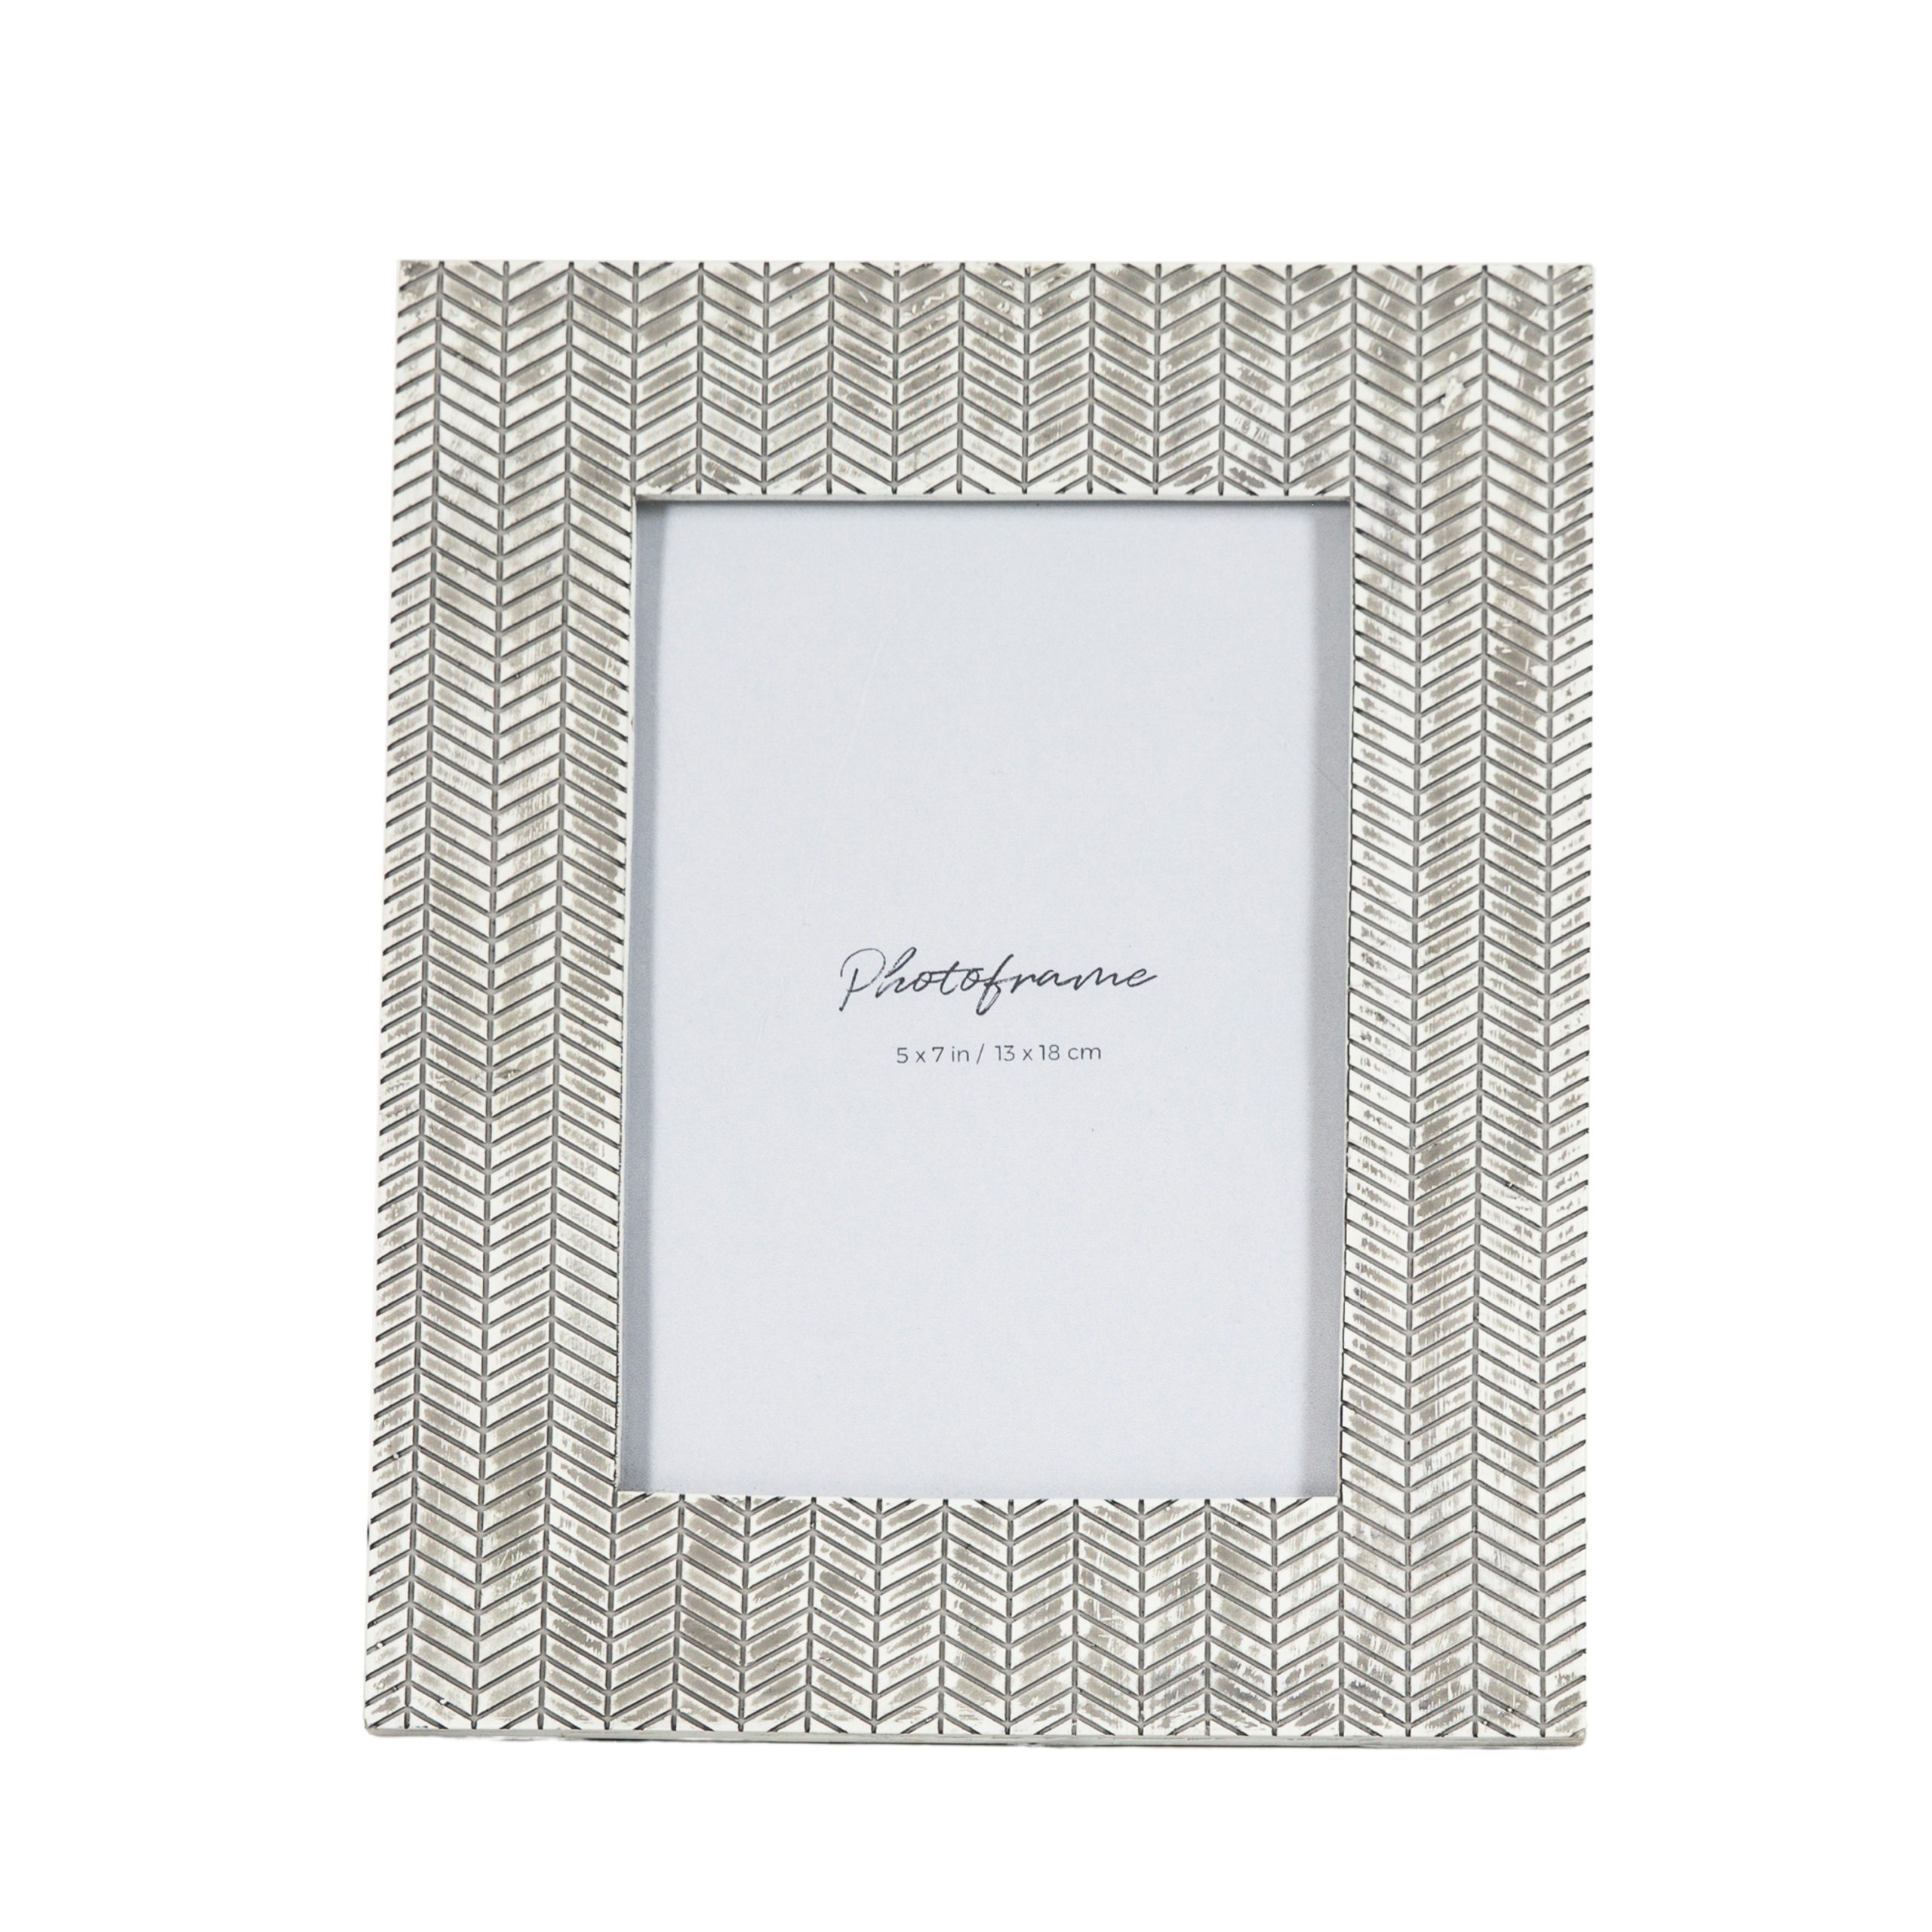 Gallery Direct Manni Photo Frame Distressed Grey